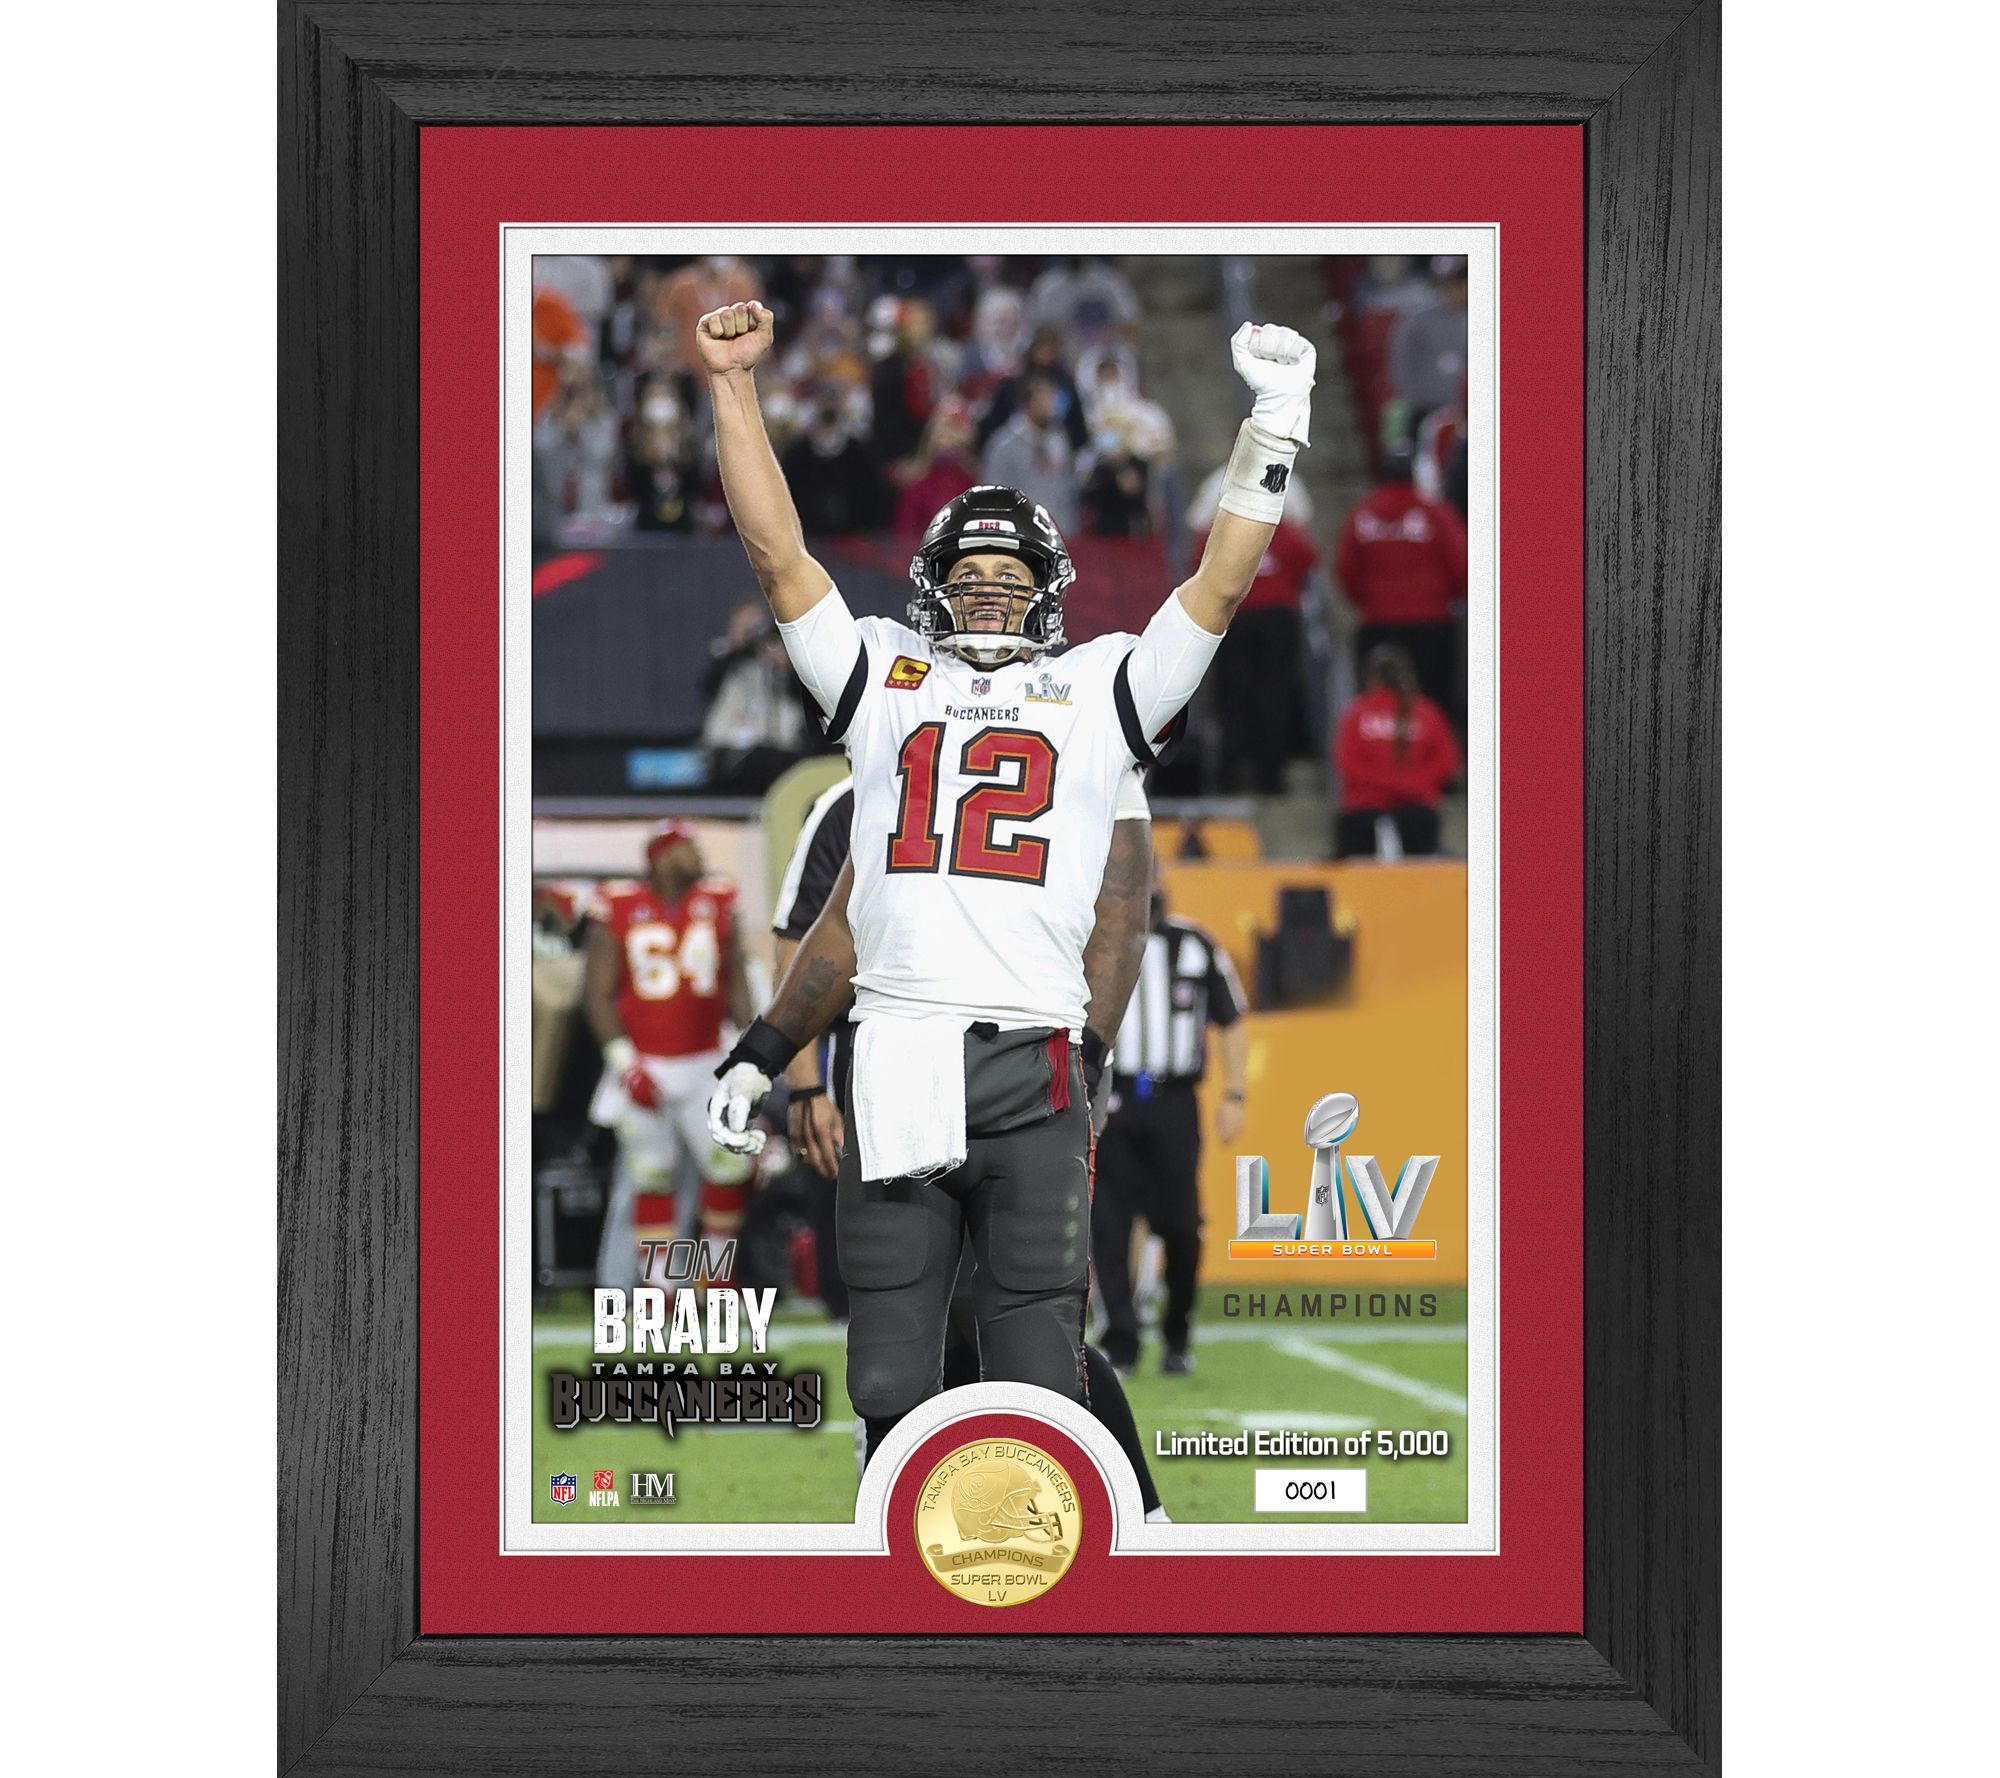 Tom Brady & Rob Gronkowski Tampa Bay Buccaneers 8 x 10 Framed Football  Championship Photo with Engraved Autographs